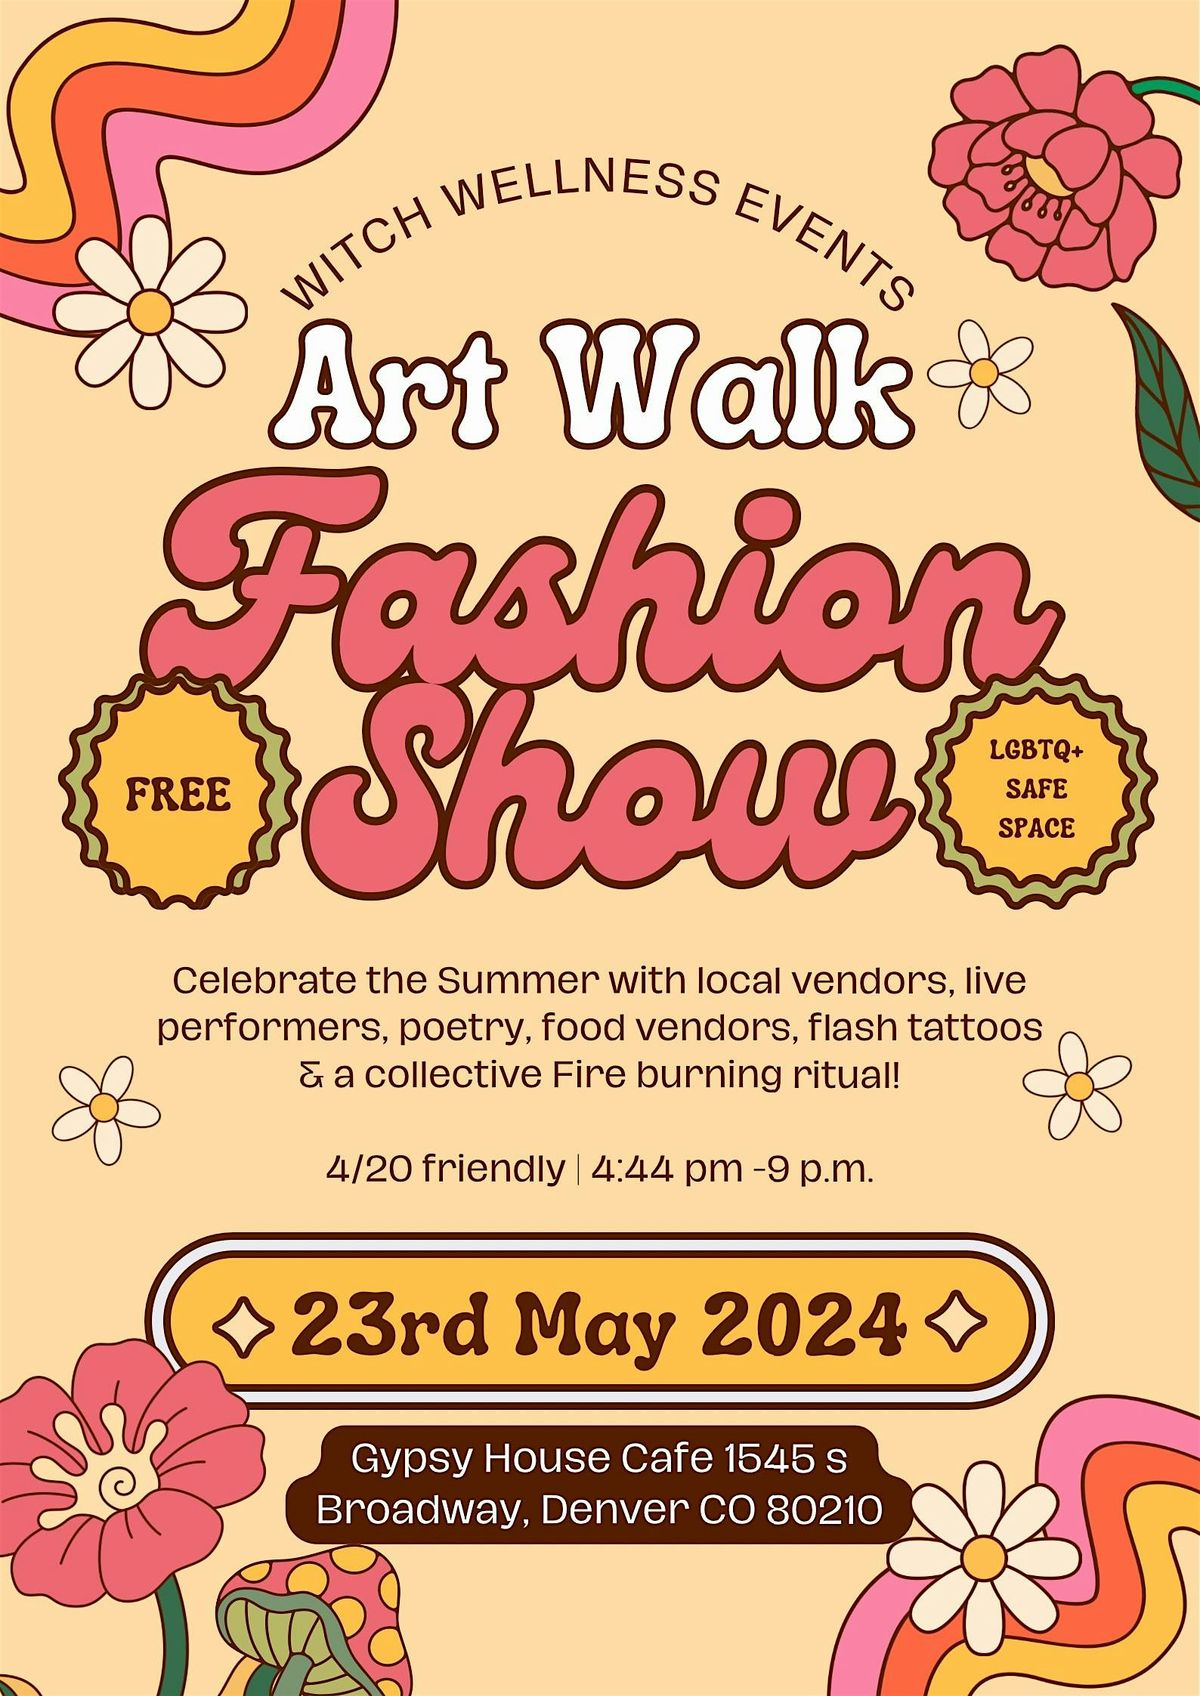 Open Mic ~ Fashion Show & Art walk! Enjoy the full moon with local vendors, performers & poets!